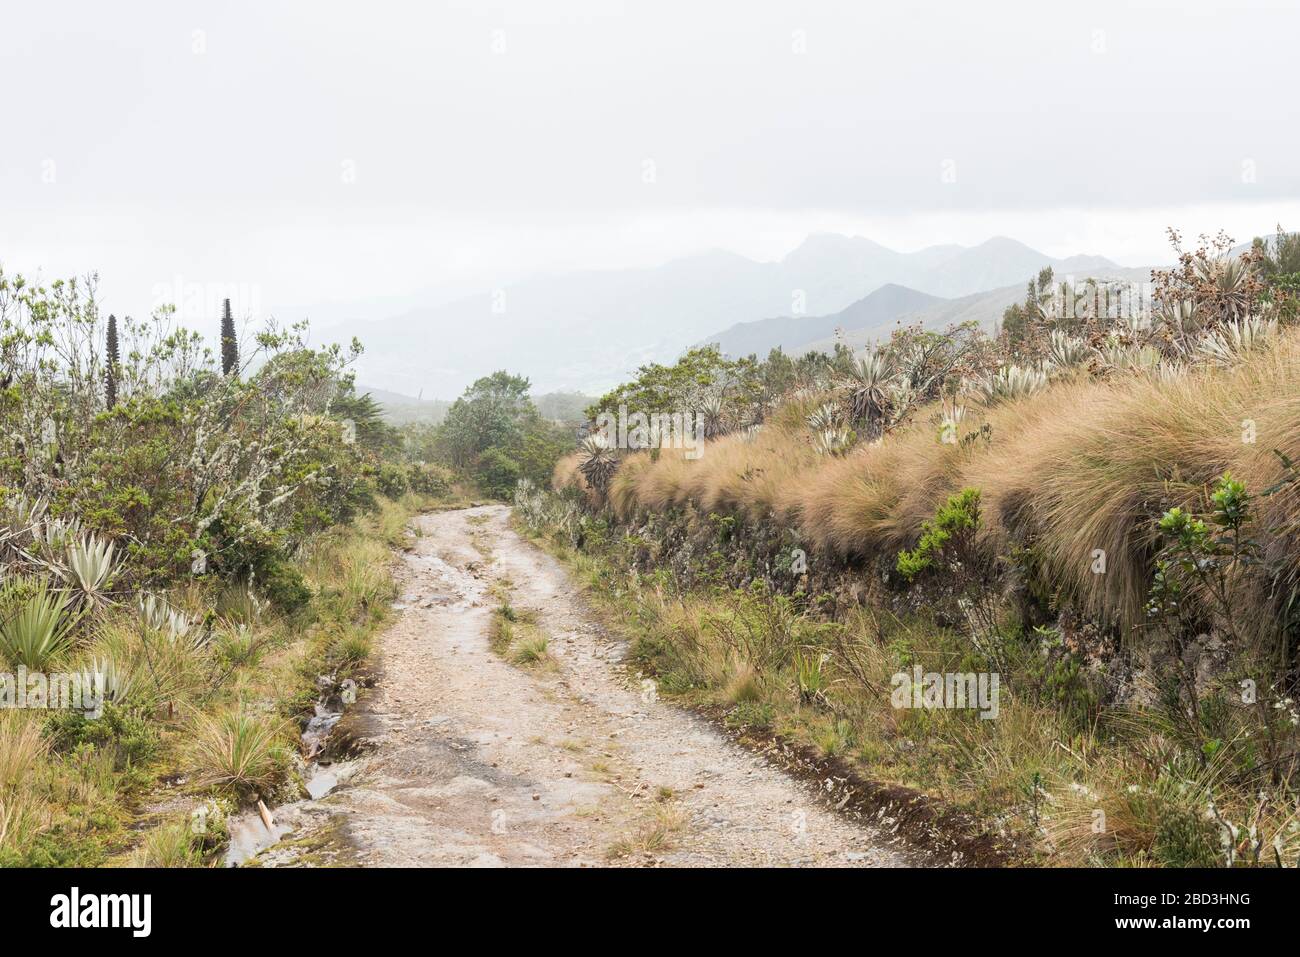 Chingaza National Natural Park, Colombia. Paramo, footpath through a moorland landscape, with native vegetation, as frailejones, espeletia, and puyas Stock Photo